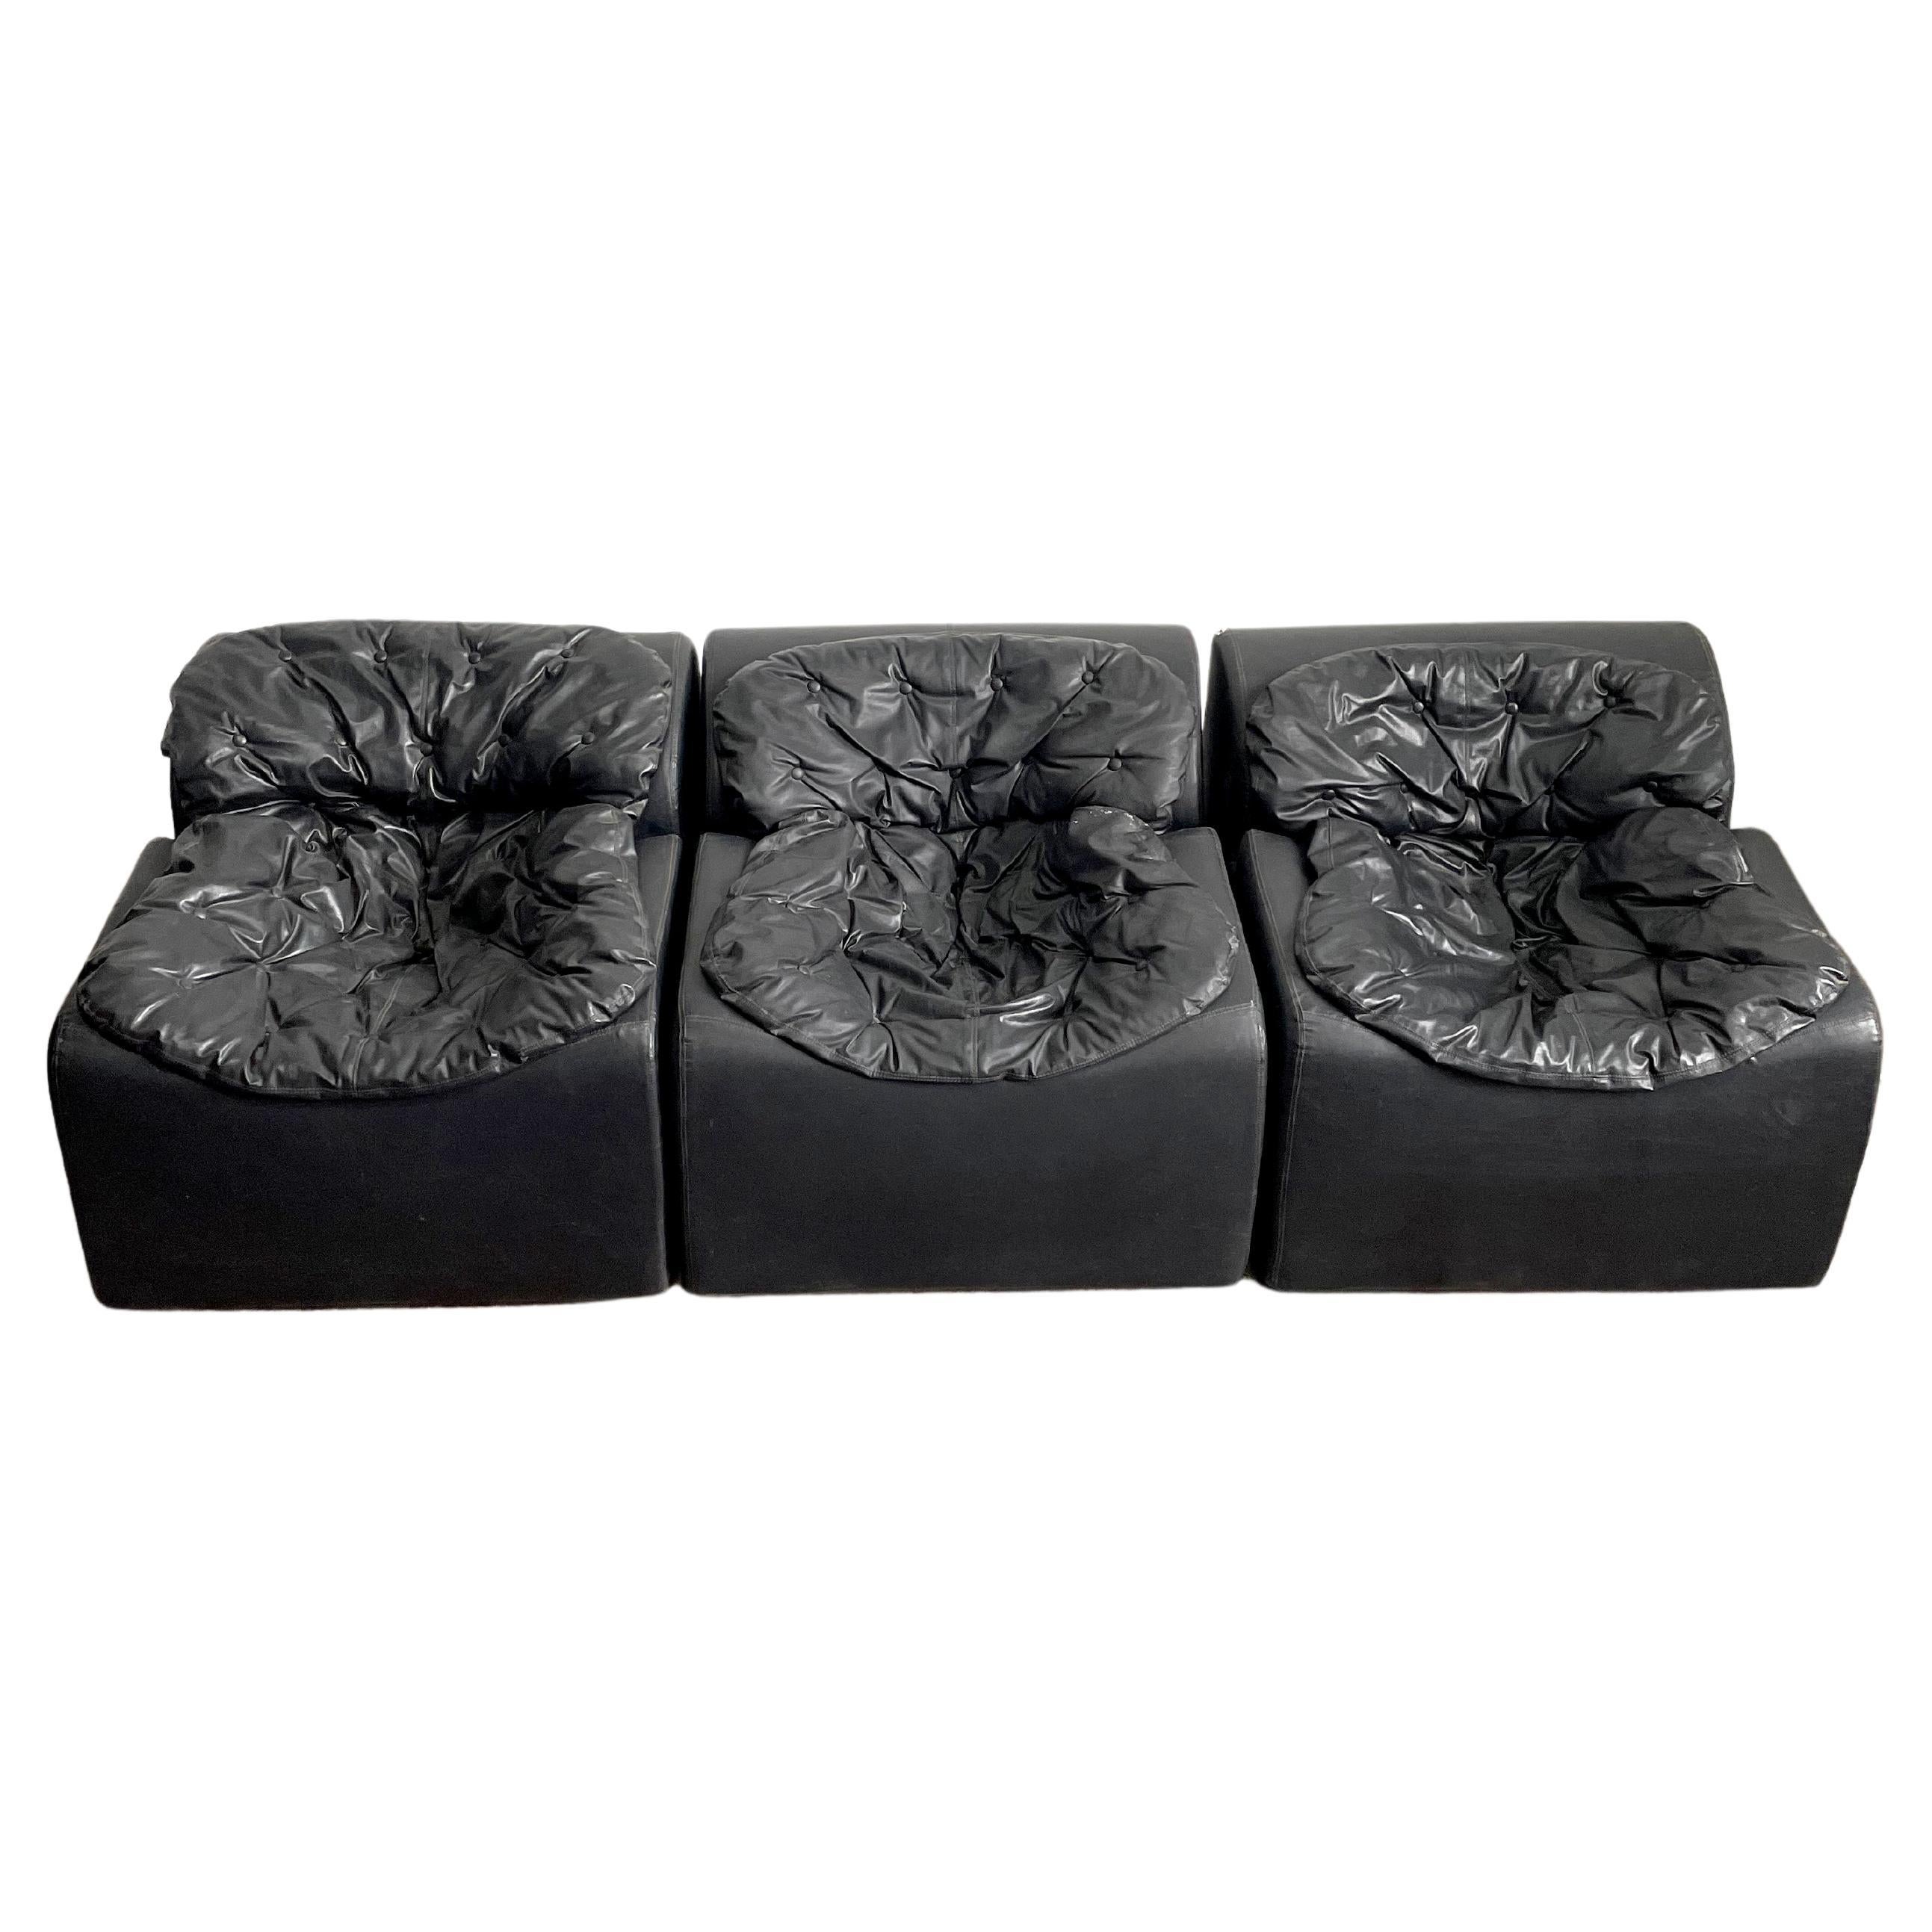 Very rare modular seating group consisting of 3 bloc-shaped lounge chairs upholstered in black faux leather 

The name of this model is 'Kim' and it was manufactured by Belgian furniture maker Beka in the late 1960s or 1970s

Remains a